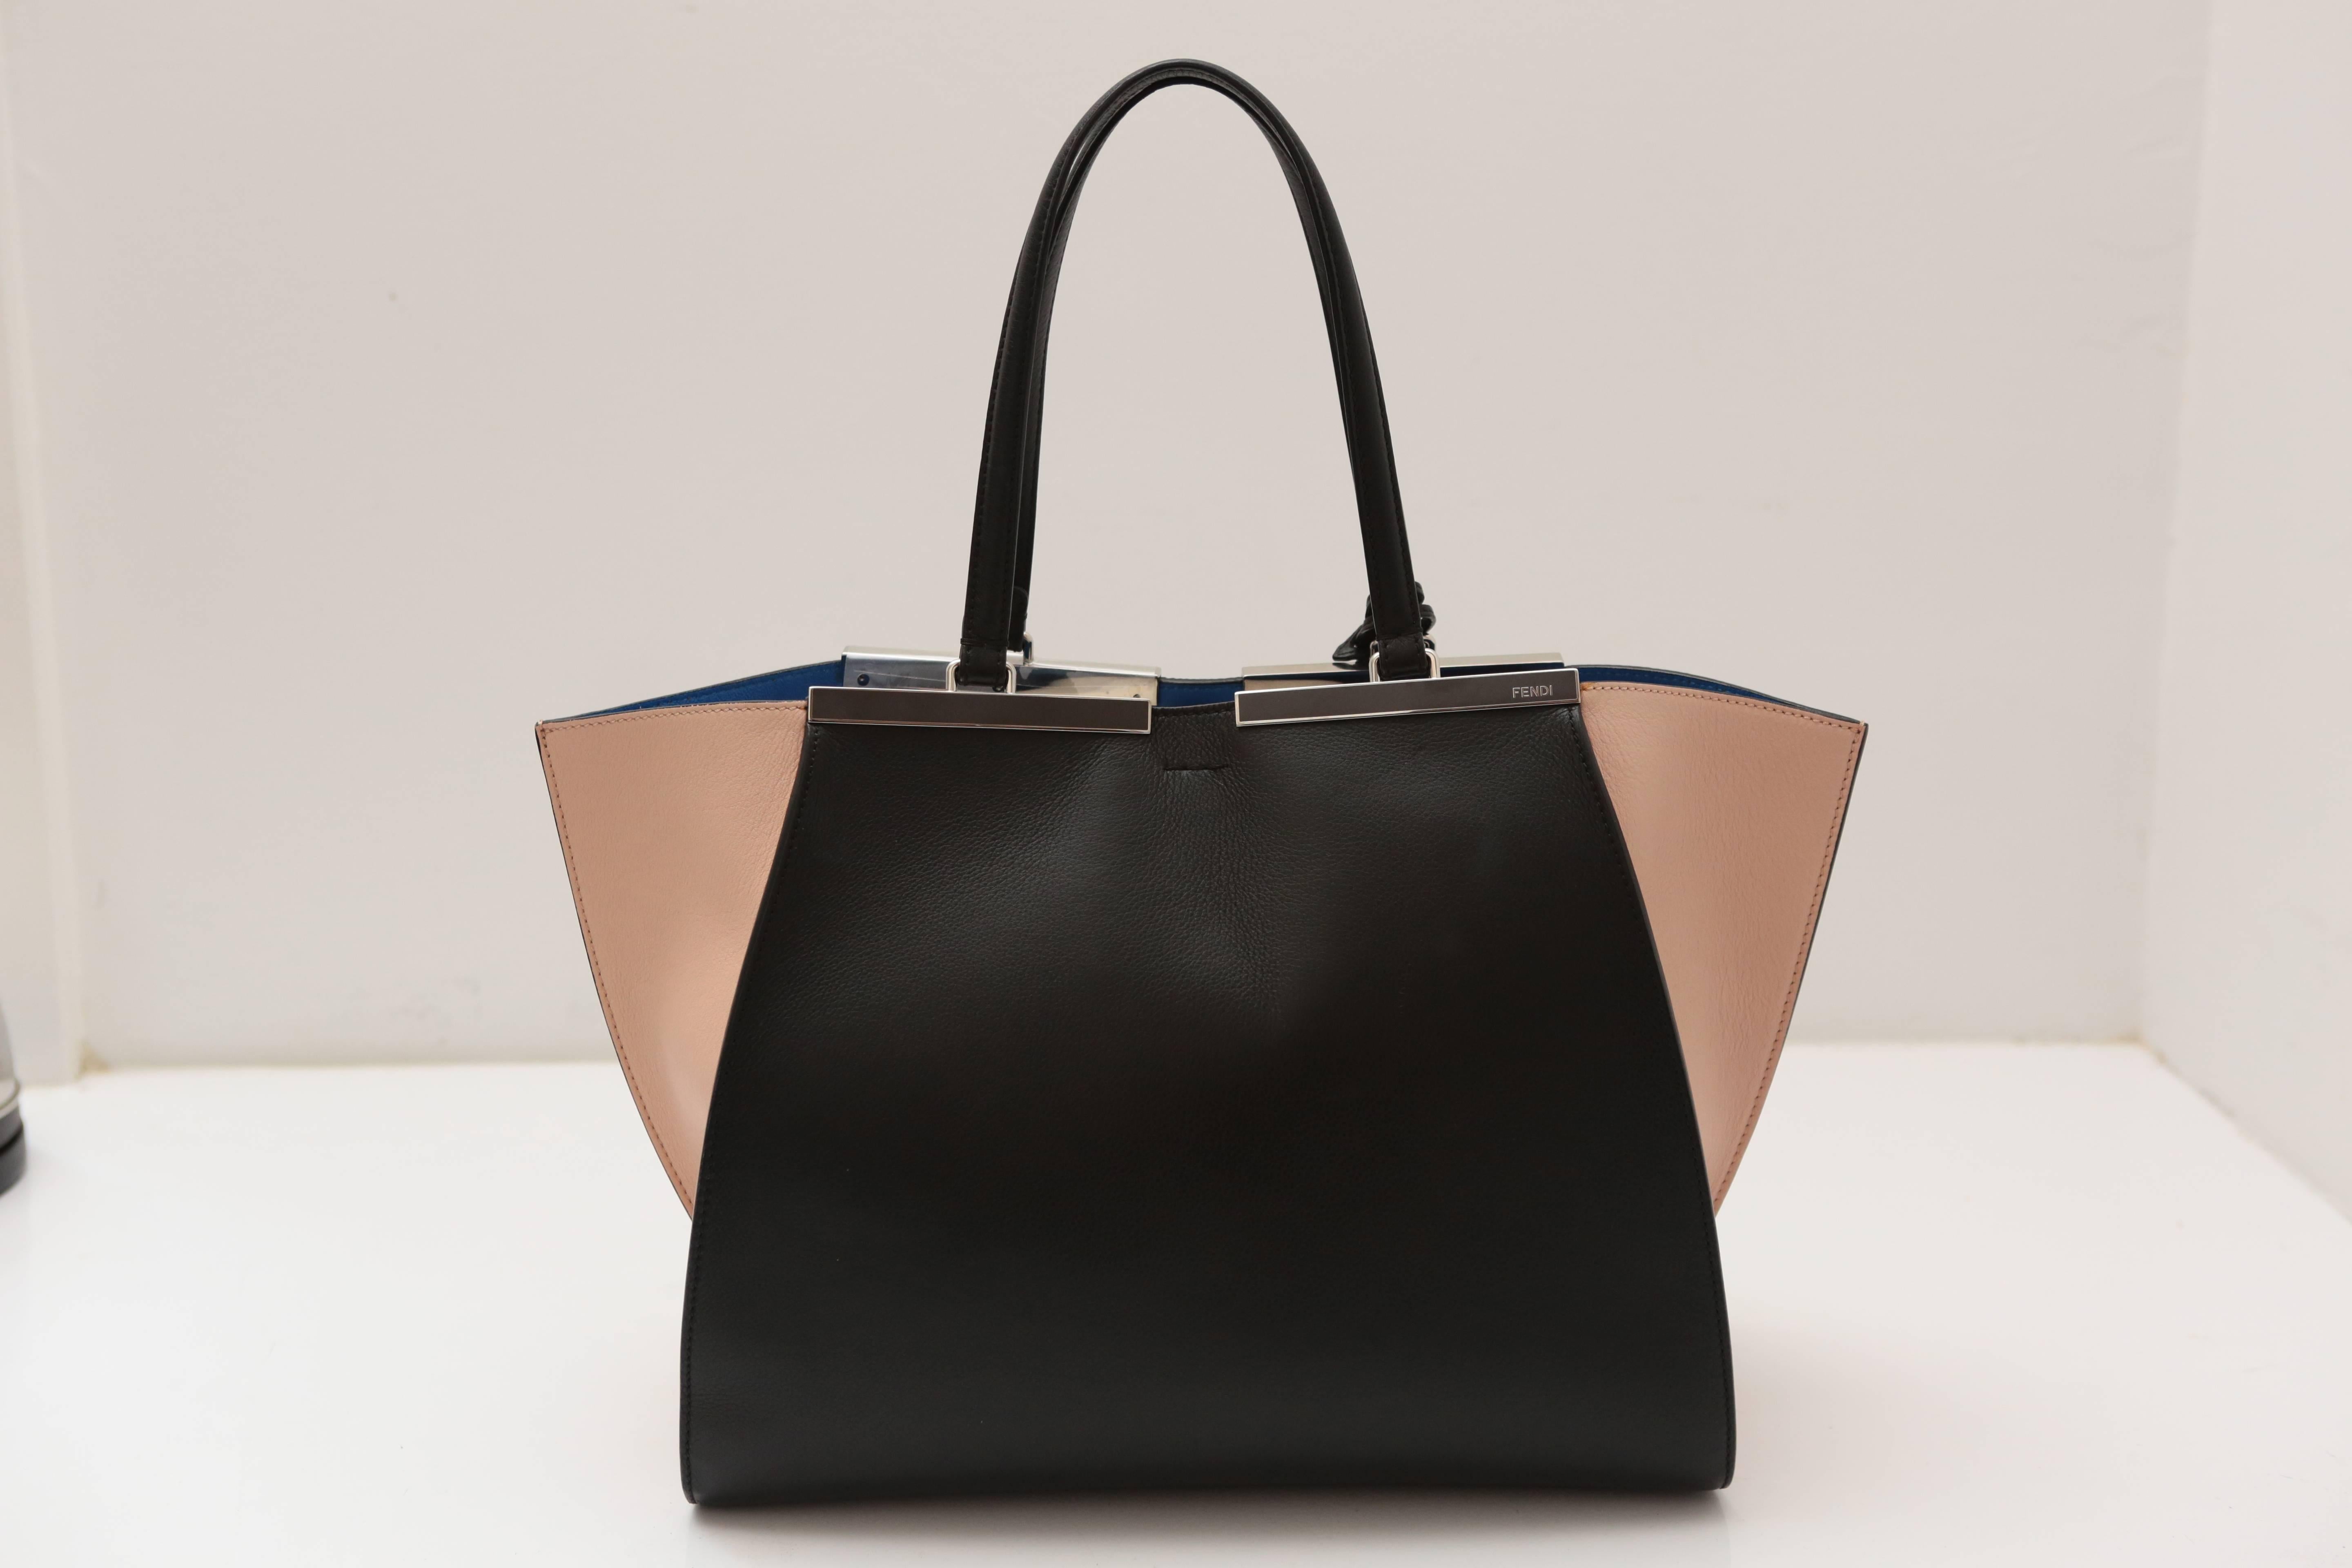 Black and nude leather exterior with blue micro suede interior featuring a tab snap top closure and jut-out sides to create extra space.  Polished silver hardware completes this must-have classic from the House of Fendi. 